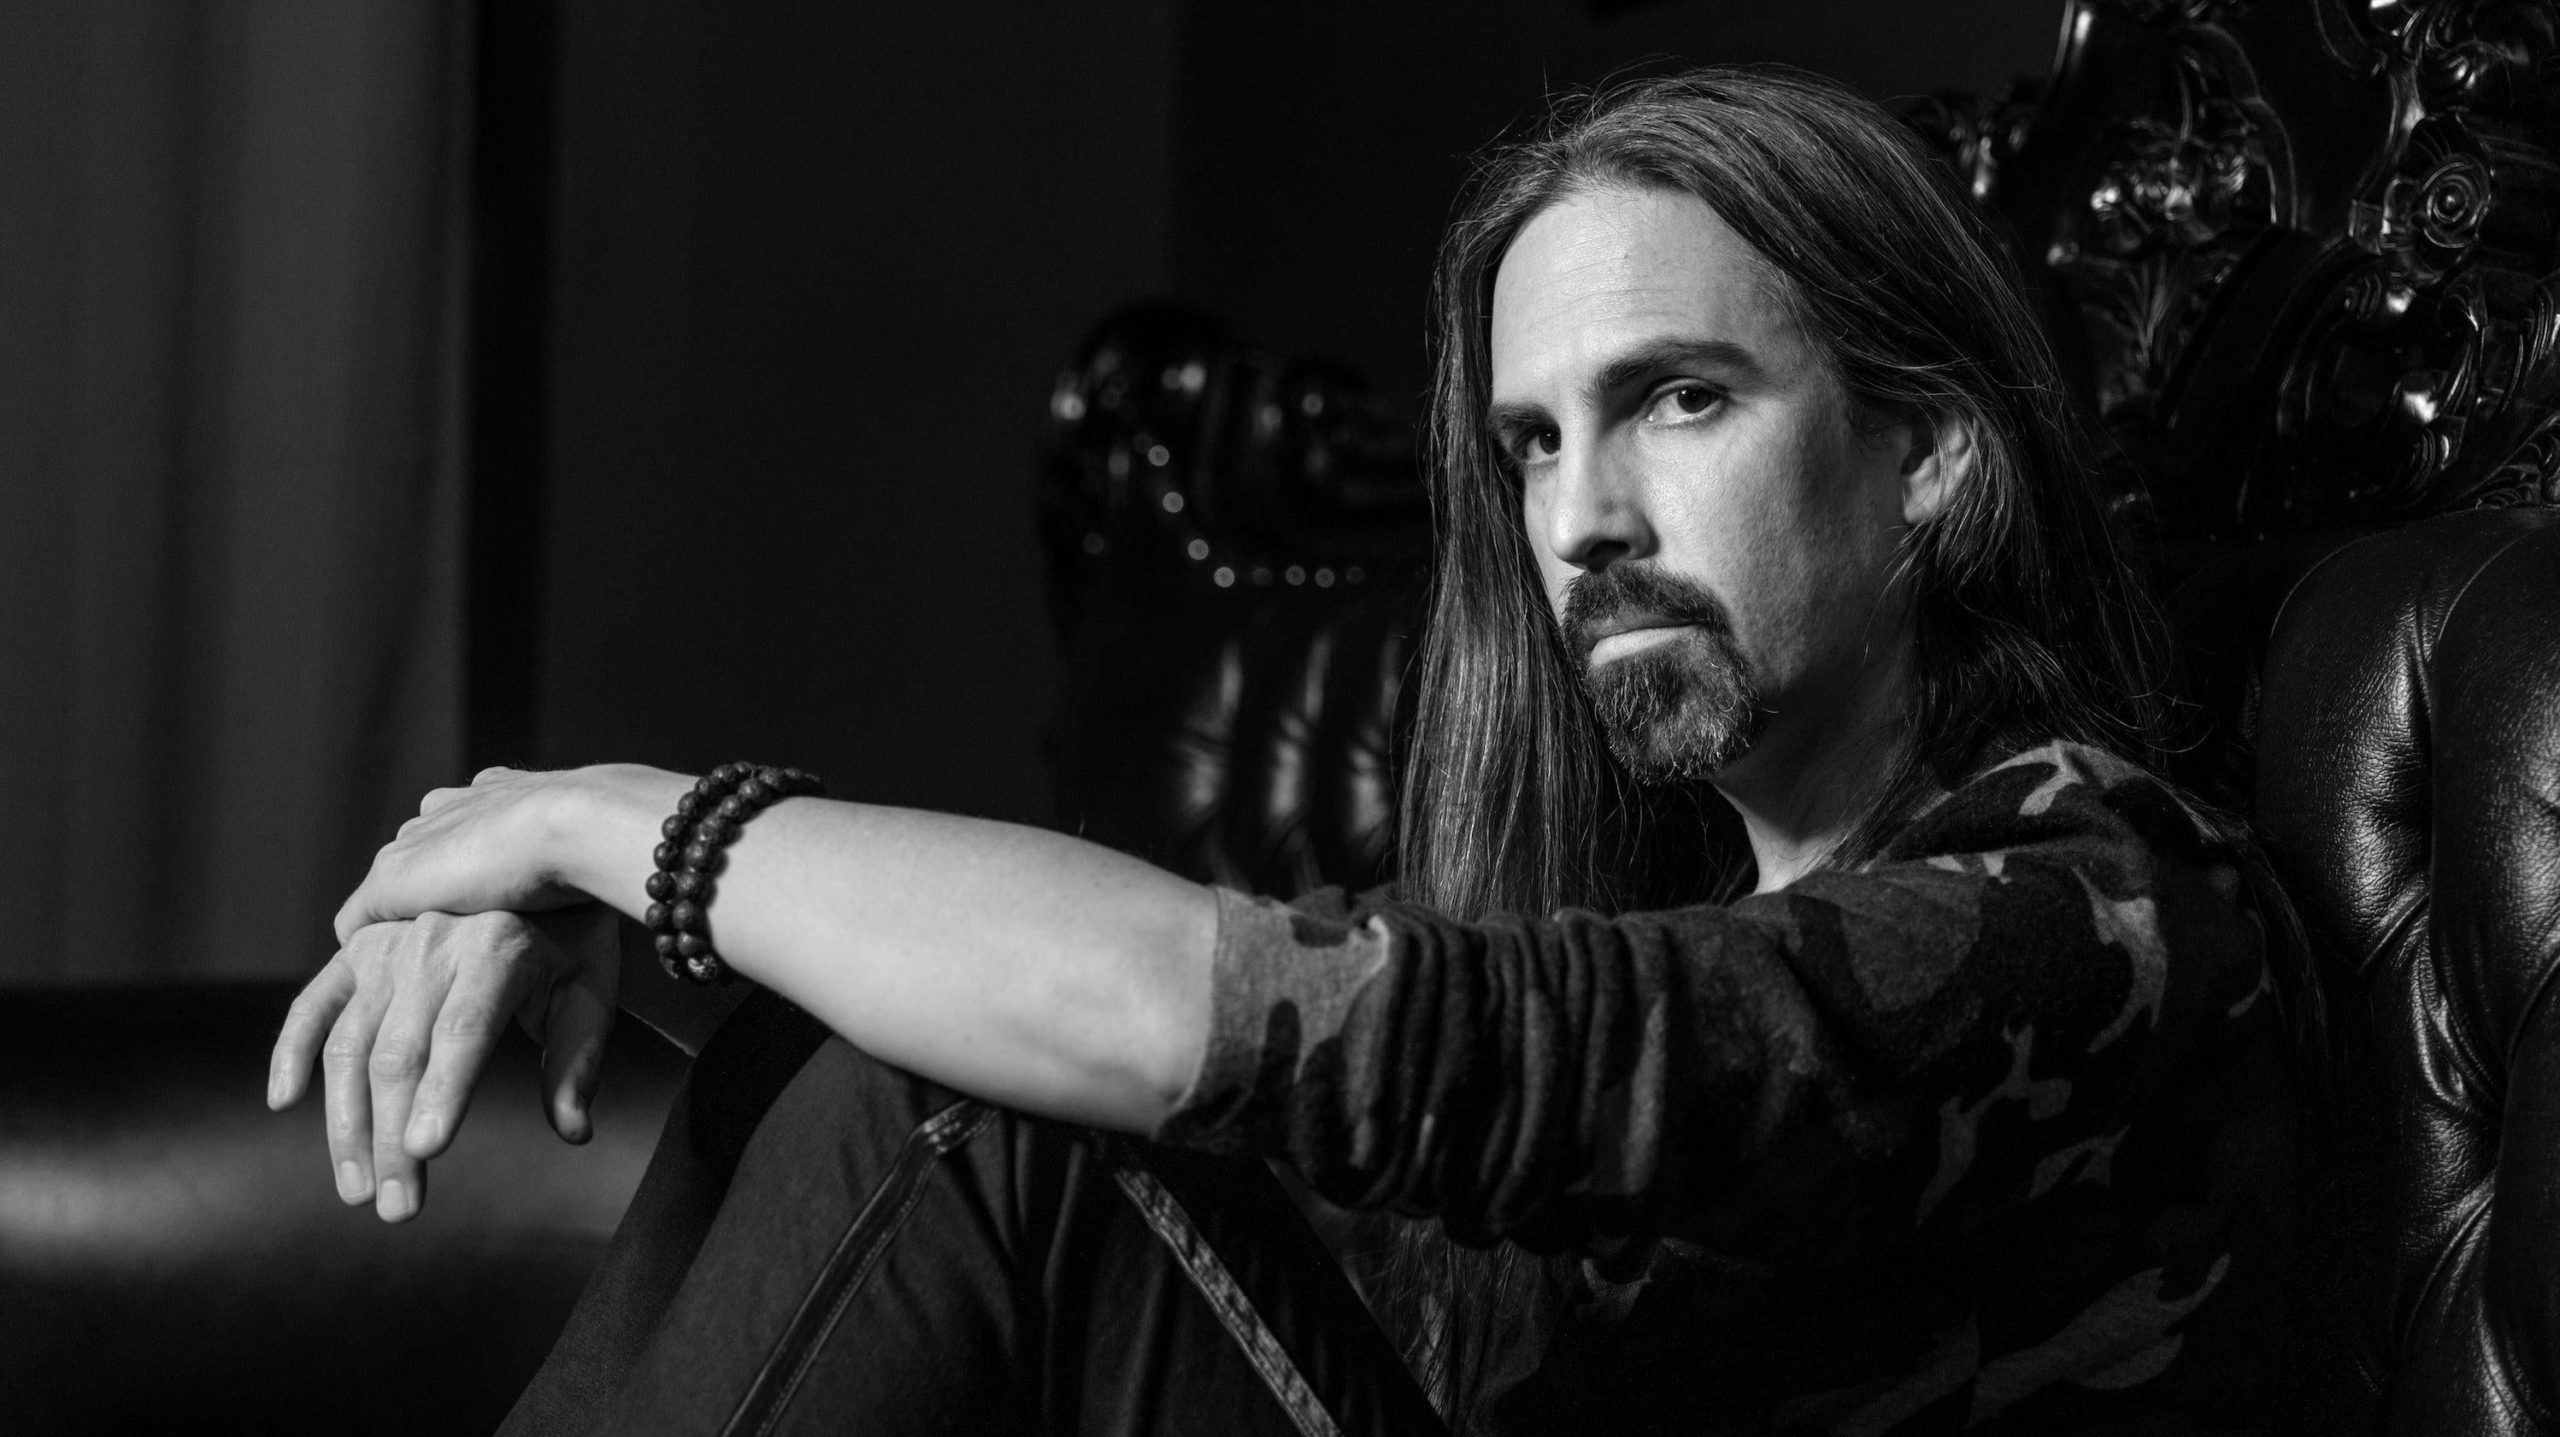 Battlestar Galactica composer Bear McCreary is extremely serious about this. (Image: Dennys Ilic)